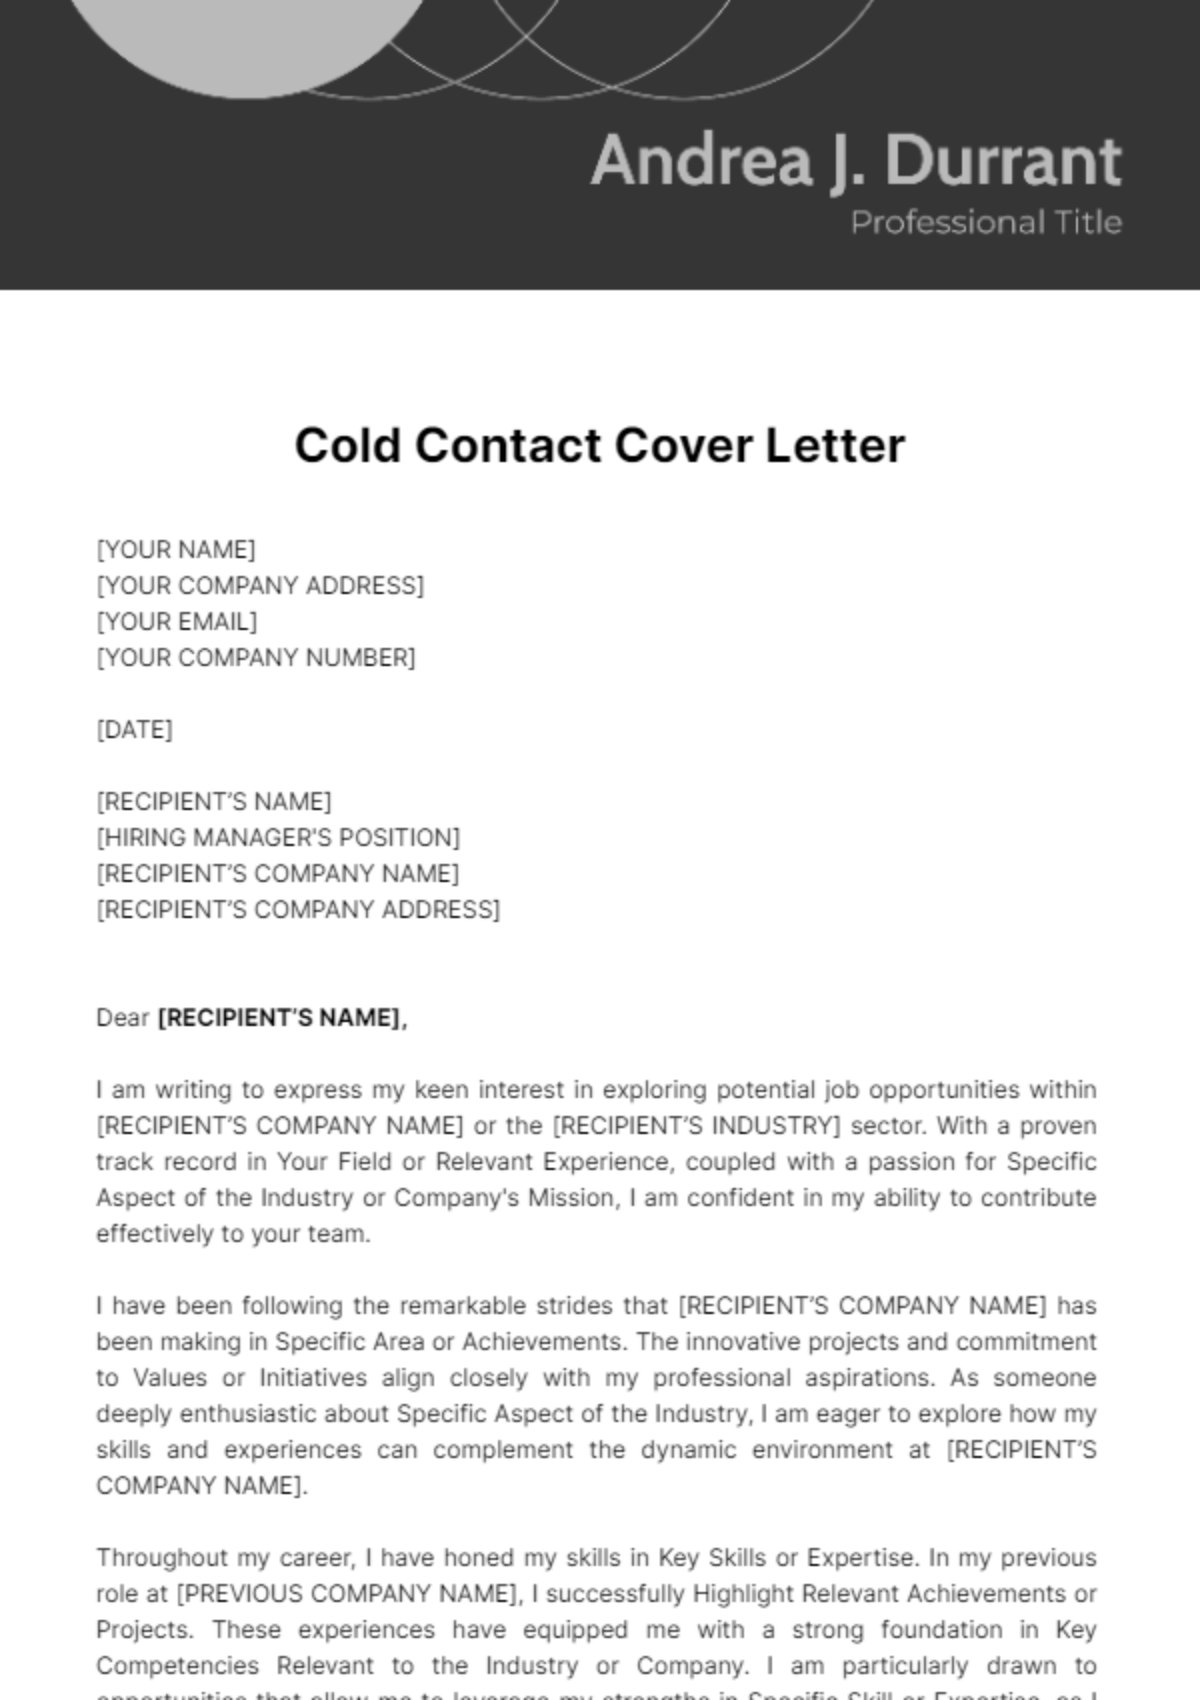 Cold Contact Cover Letter Template